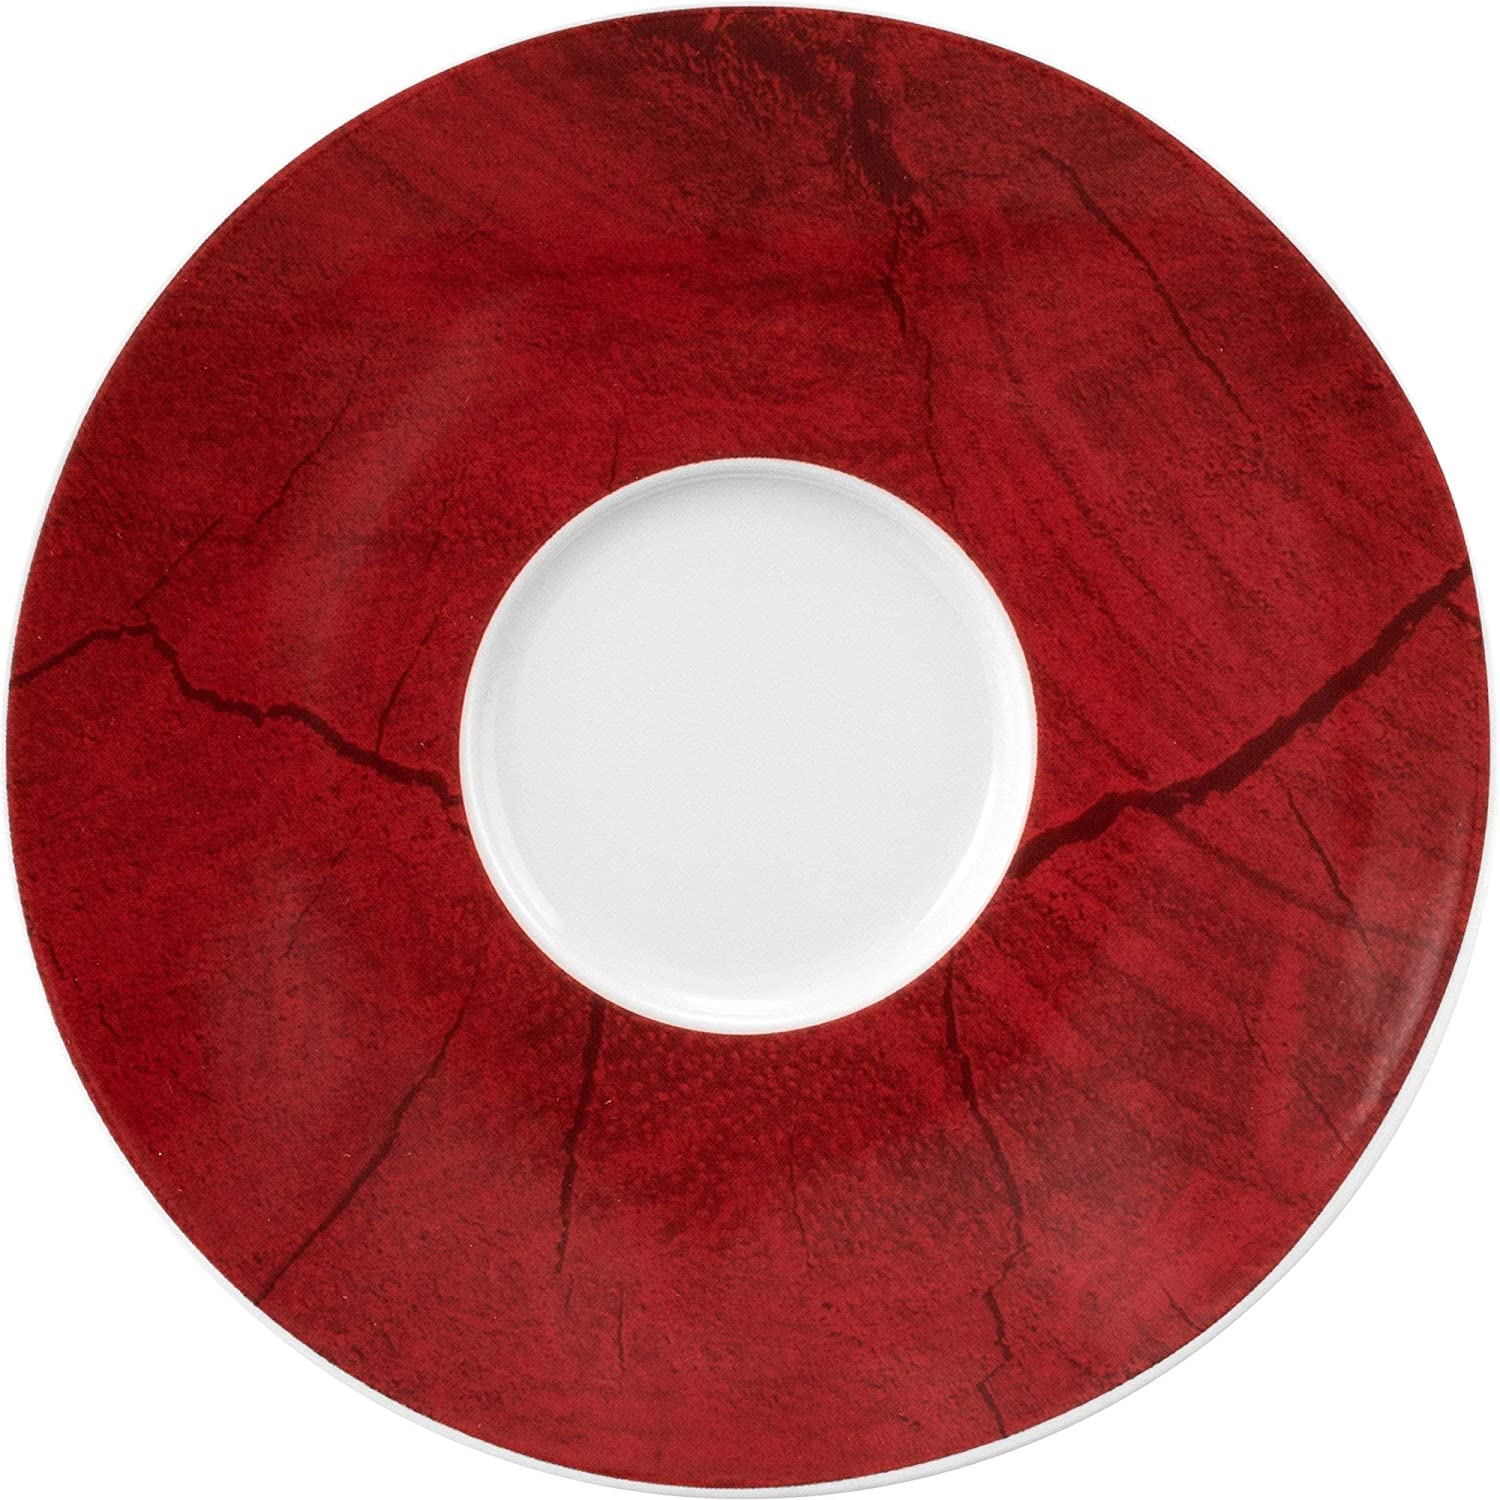 Seltmann 001.753896 Life Porcelain Combination Saucer, Round, Red, 16.4 cm Diameter, 1.9 cm Height, Pack of 6